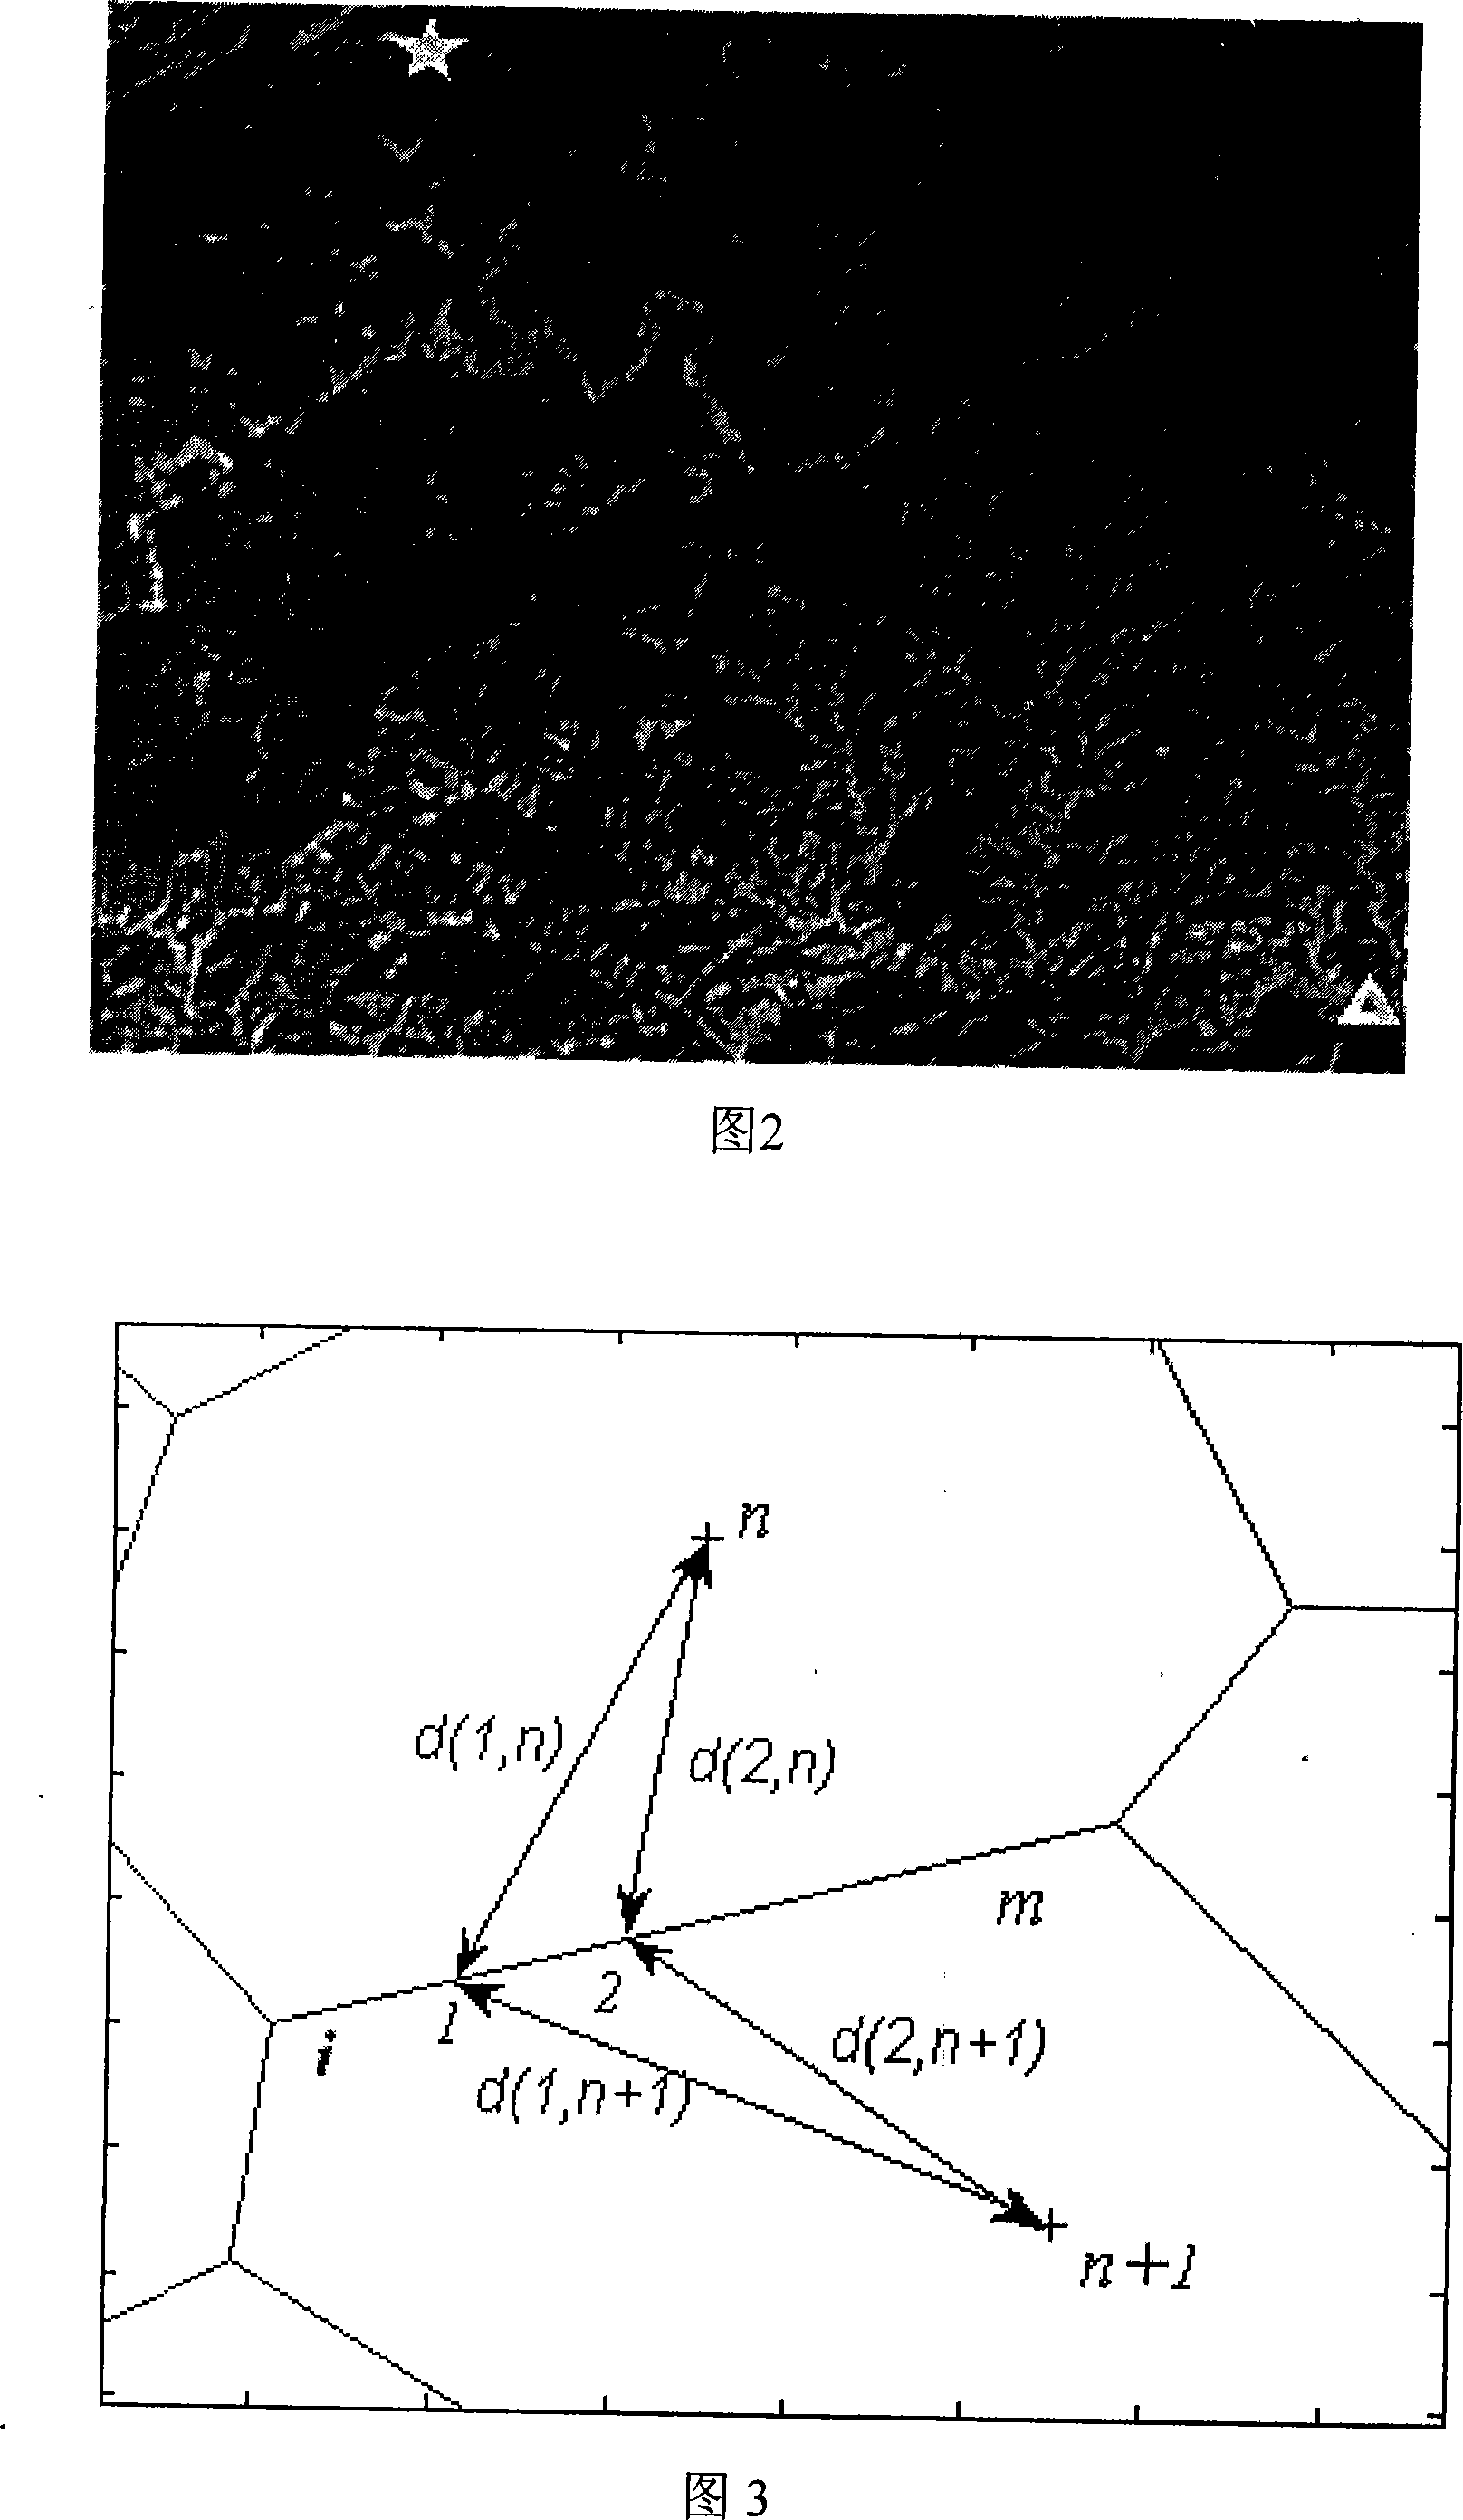 Un-manned plane fairway layout method based on Voronoi graph and ant colony optimization algorithm